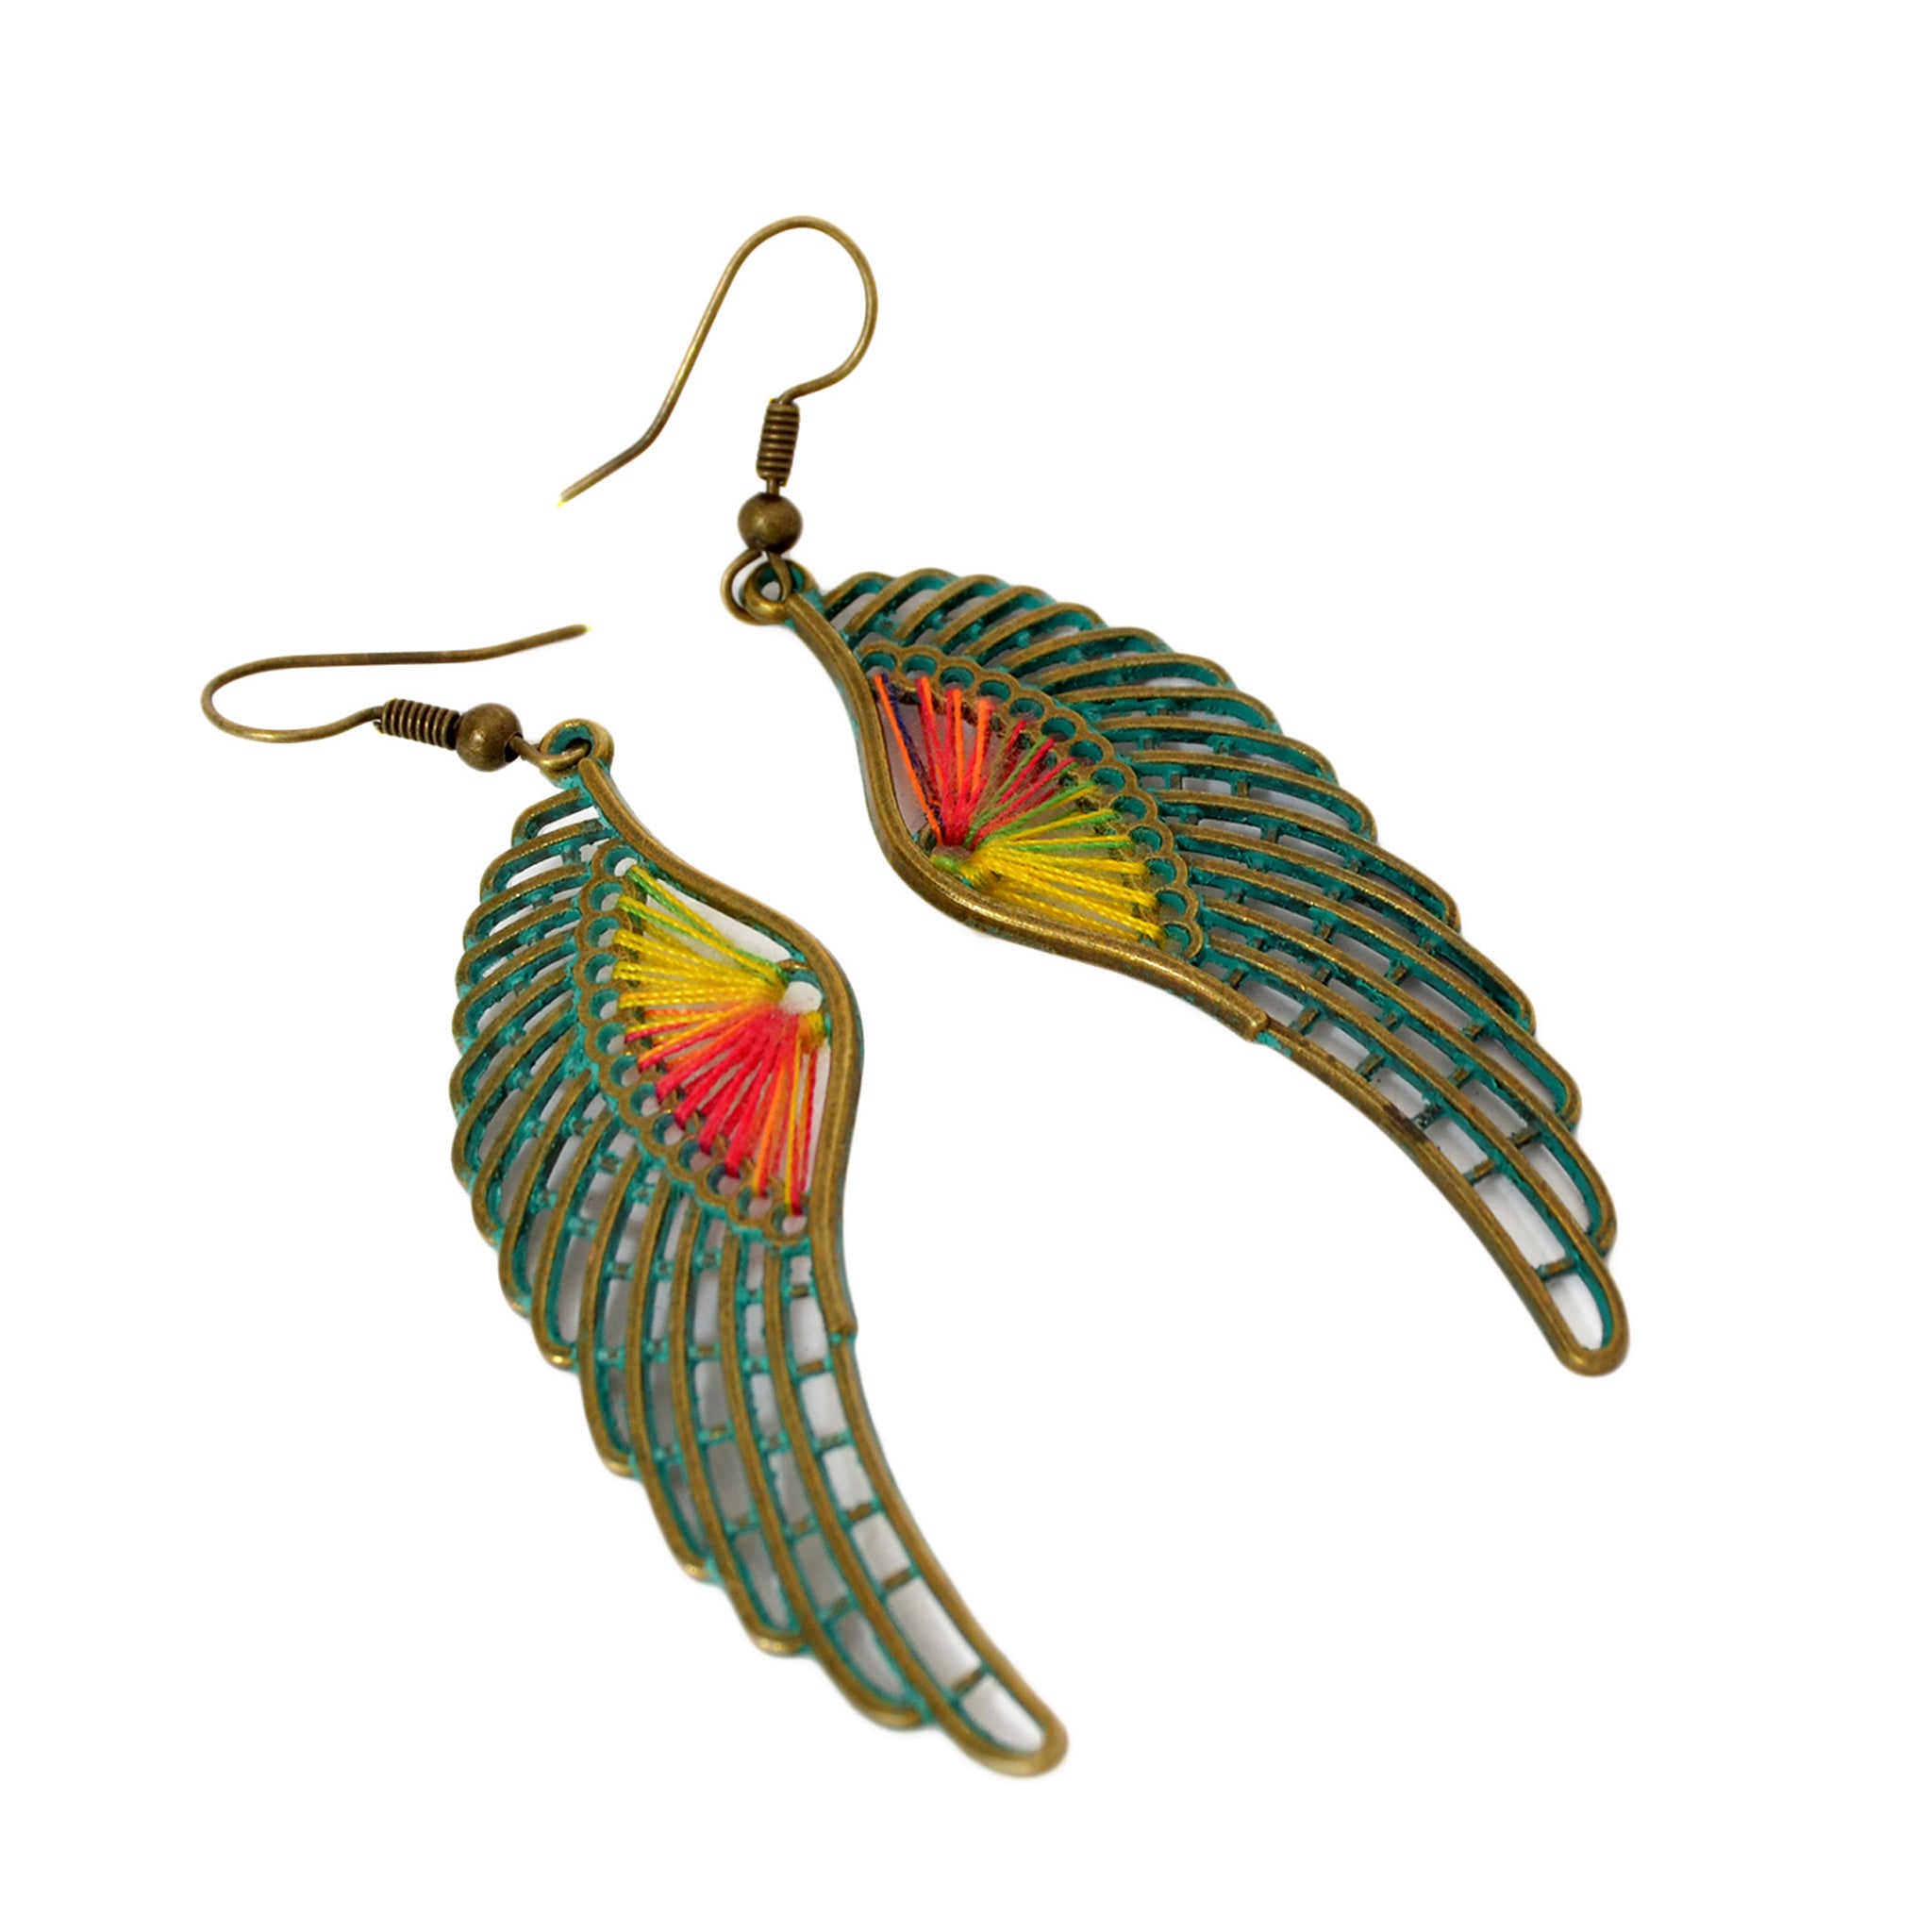 Wing hook earrings with colored threads and old green patina on brass